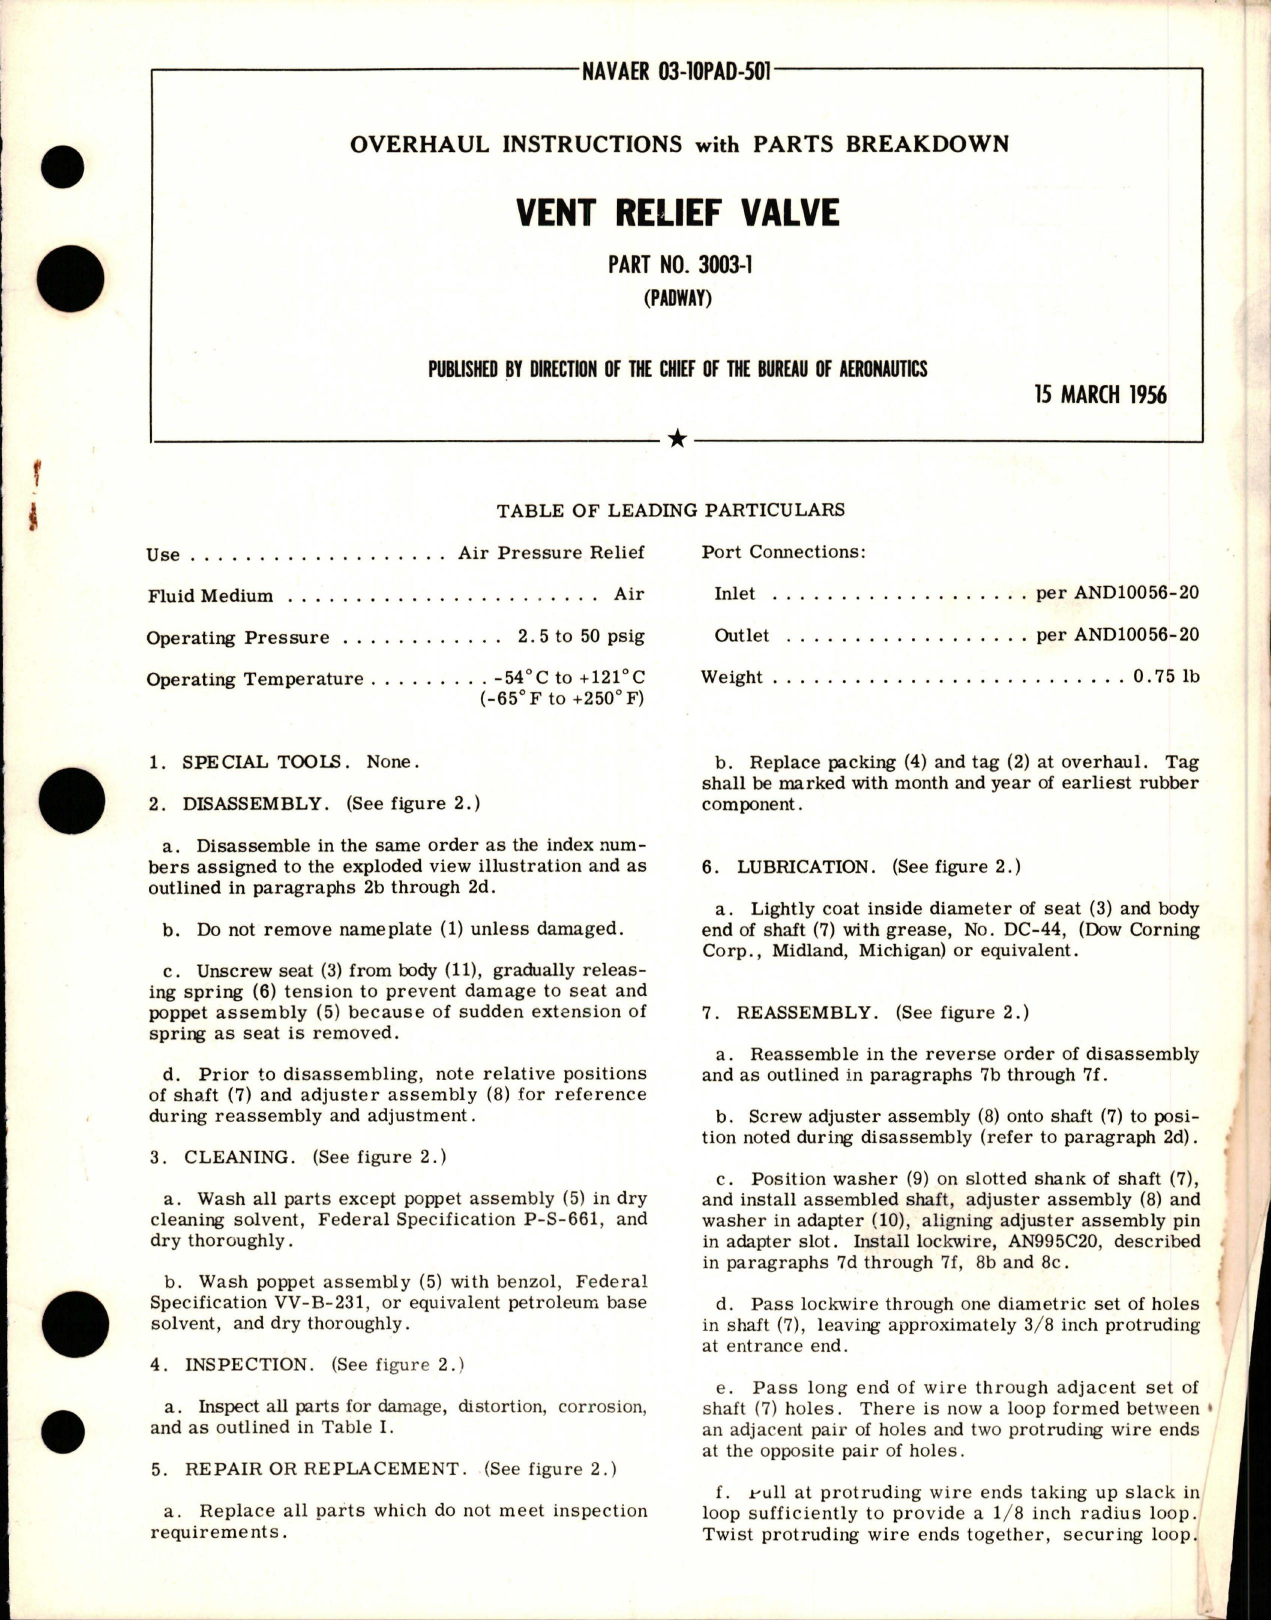 Sample page 1 from AirCorps Library document: Overhaul Instructions with Parts for Vent Relief Valve - Part 3003-1